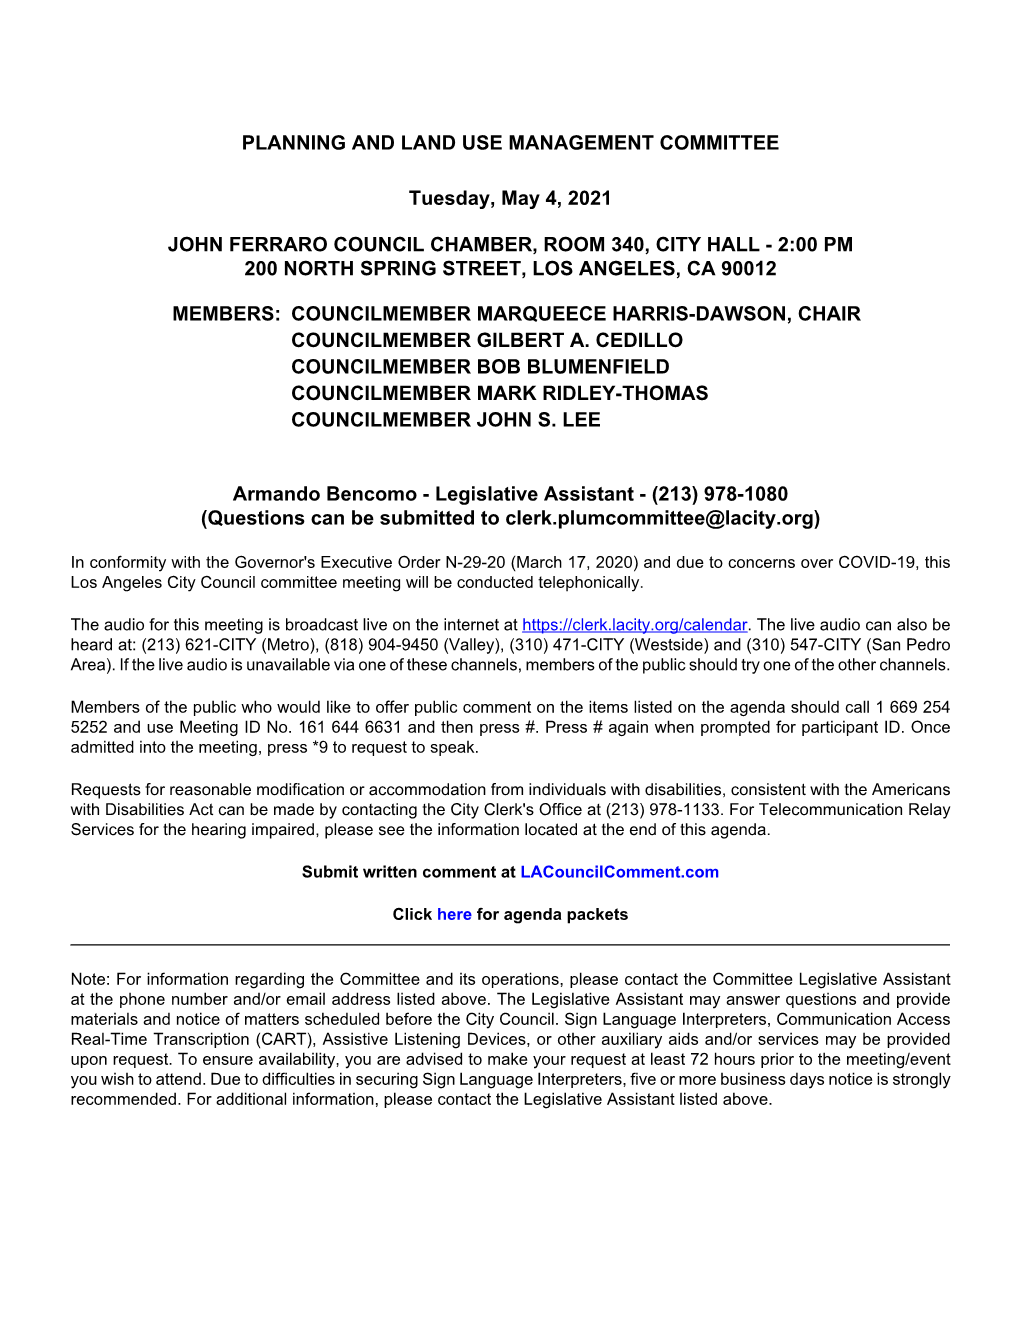 Planning and Land Use Management Committee May 4, 2021 Meeting